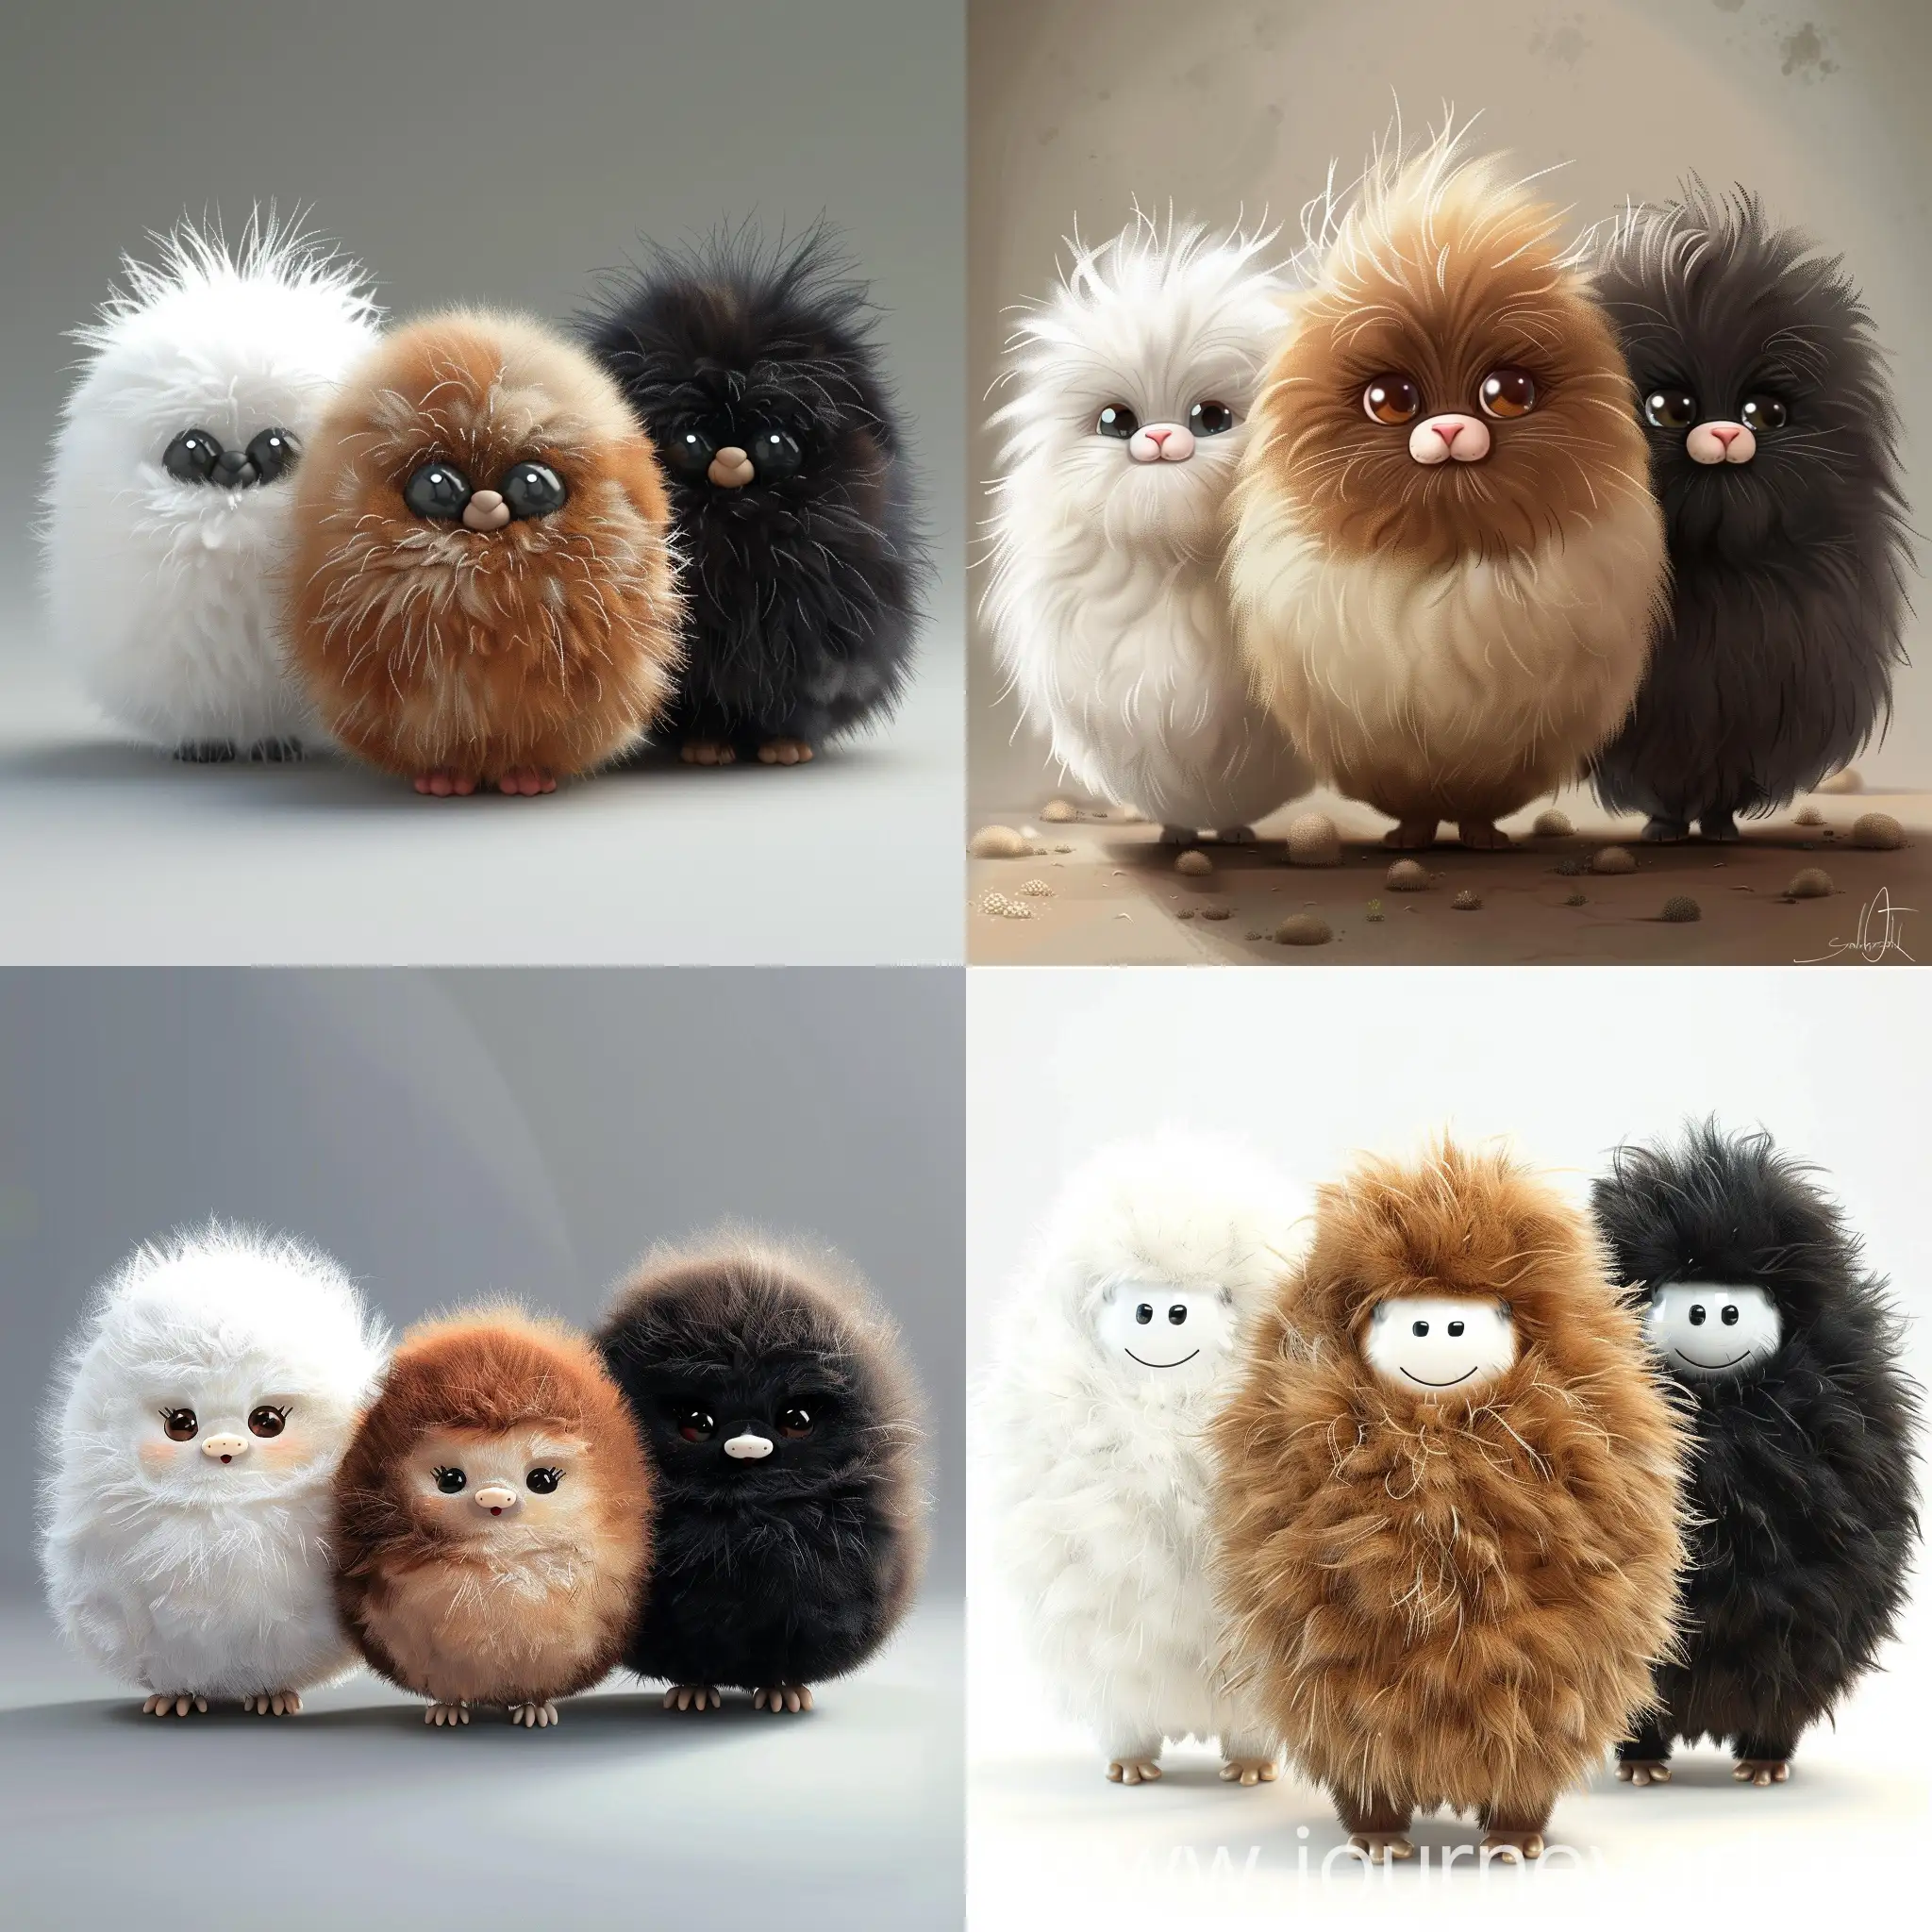 Fluffy-Eggshaped-Animals-with-Smiling-Faces